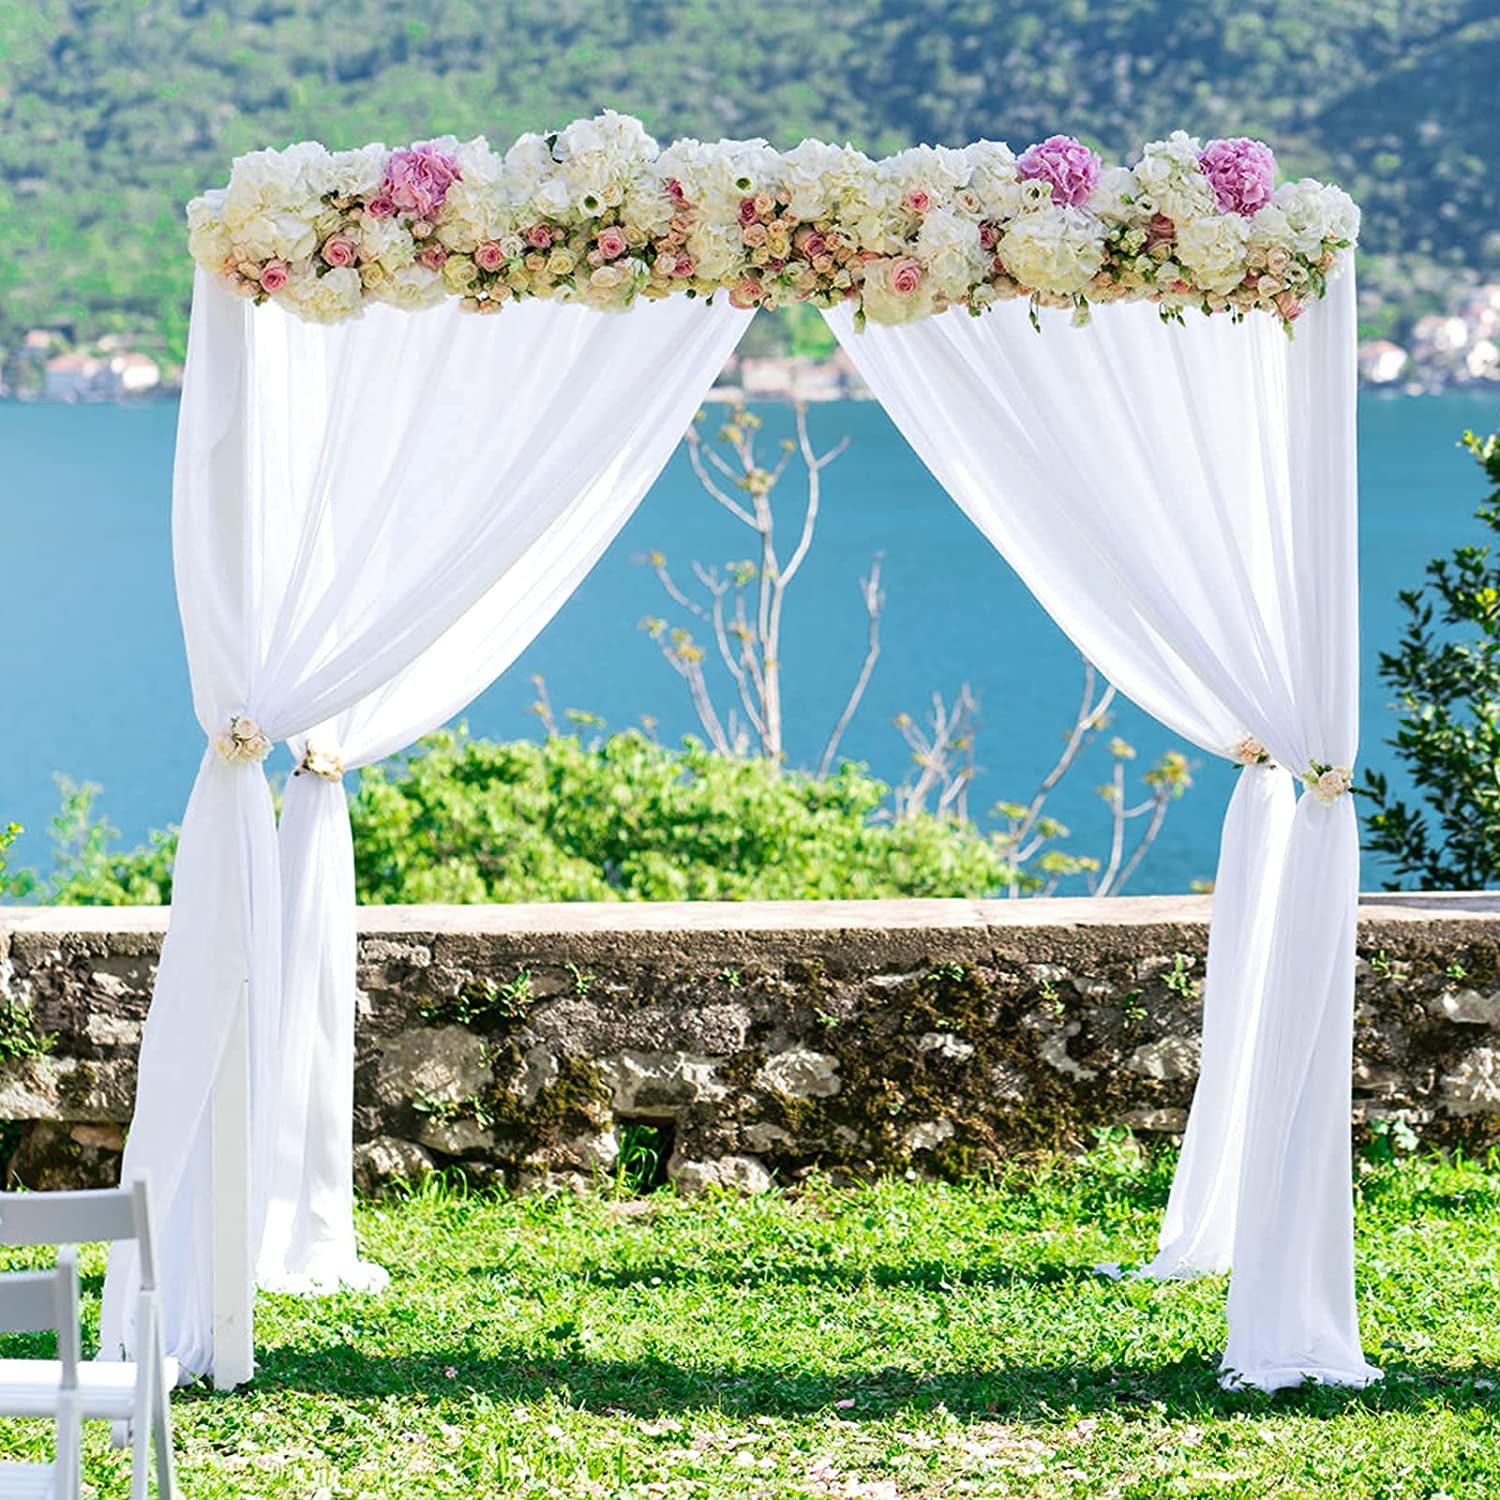 Best Wedding backdrop 10ft Designs for a gorgeous wedding